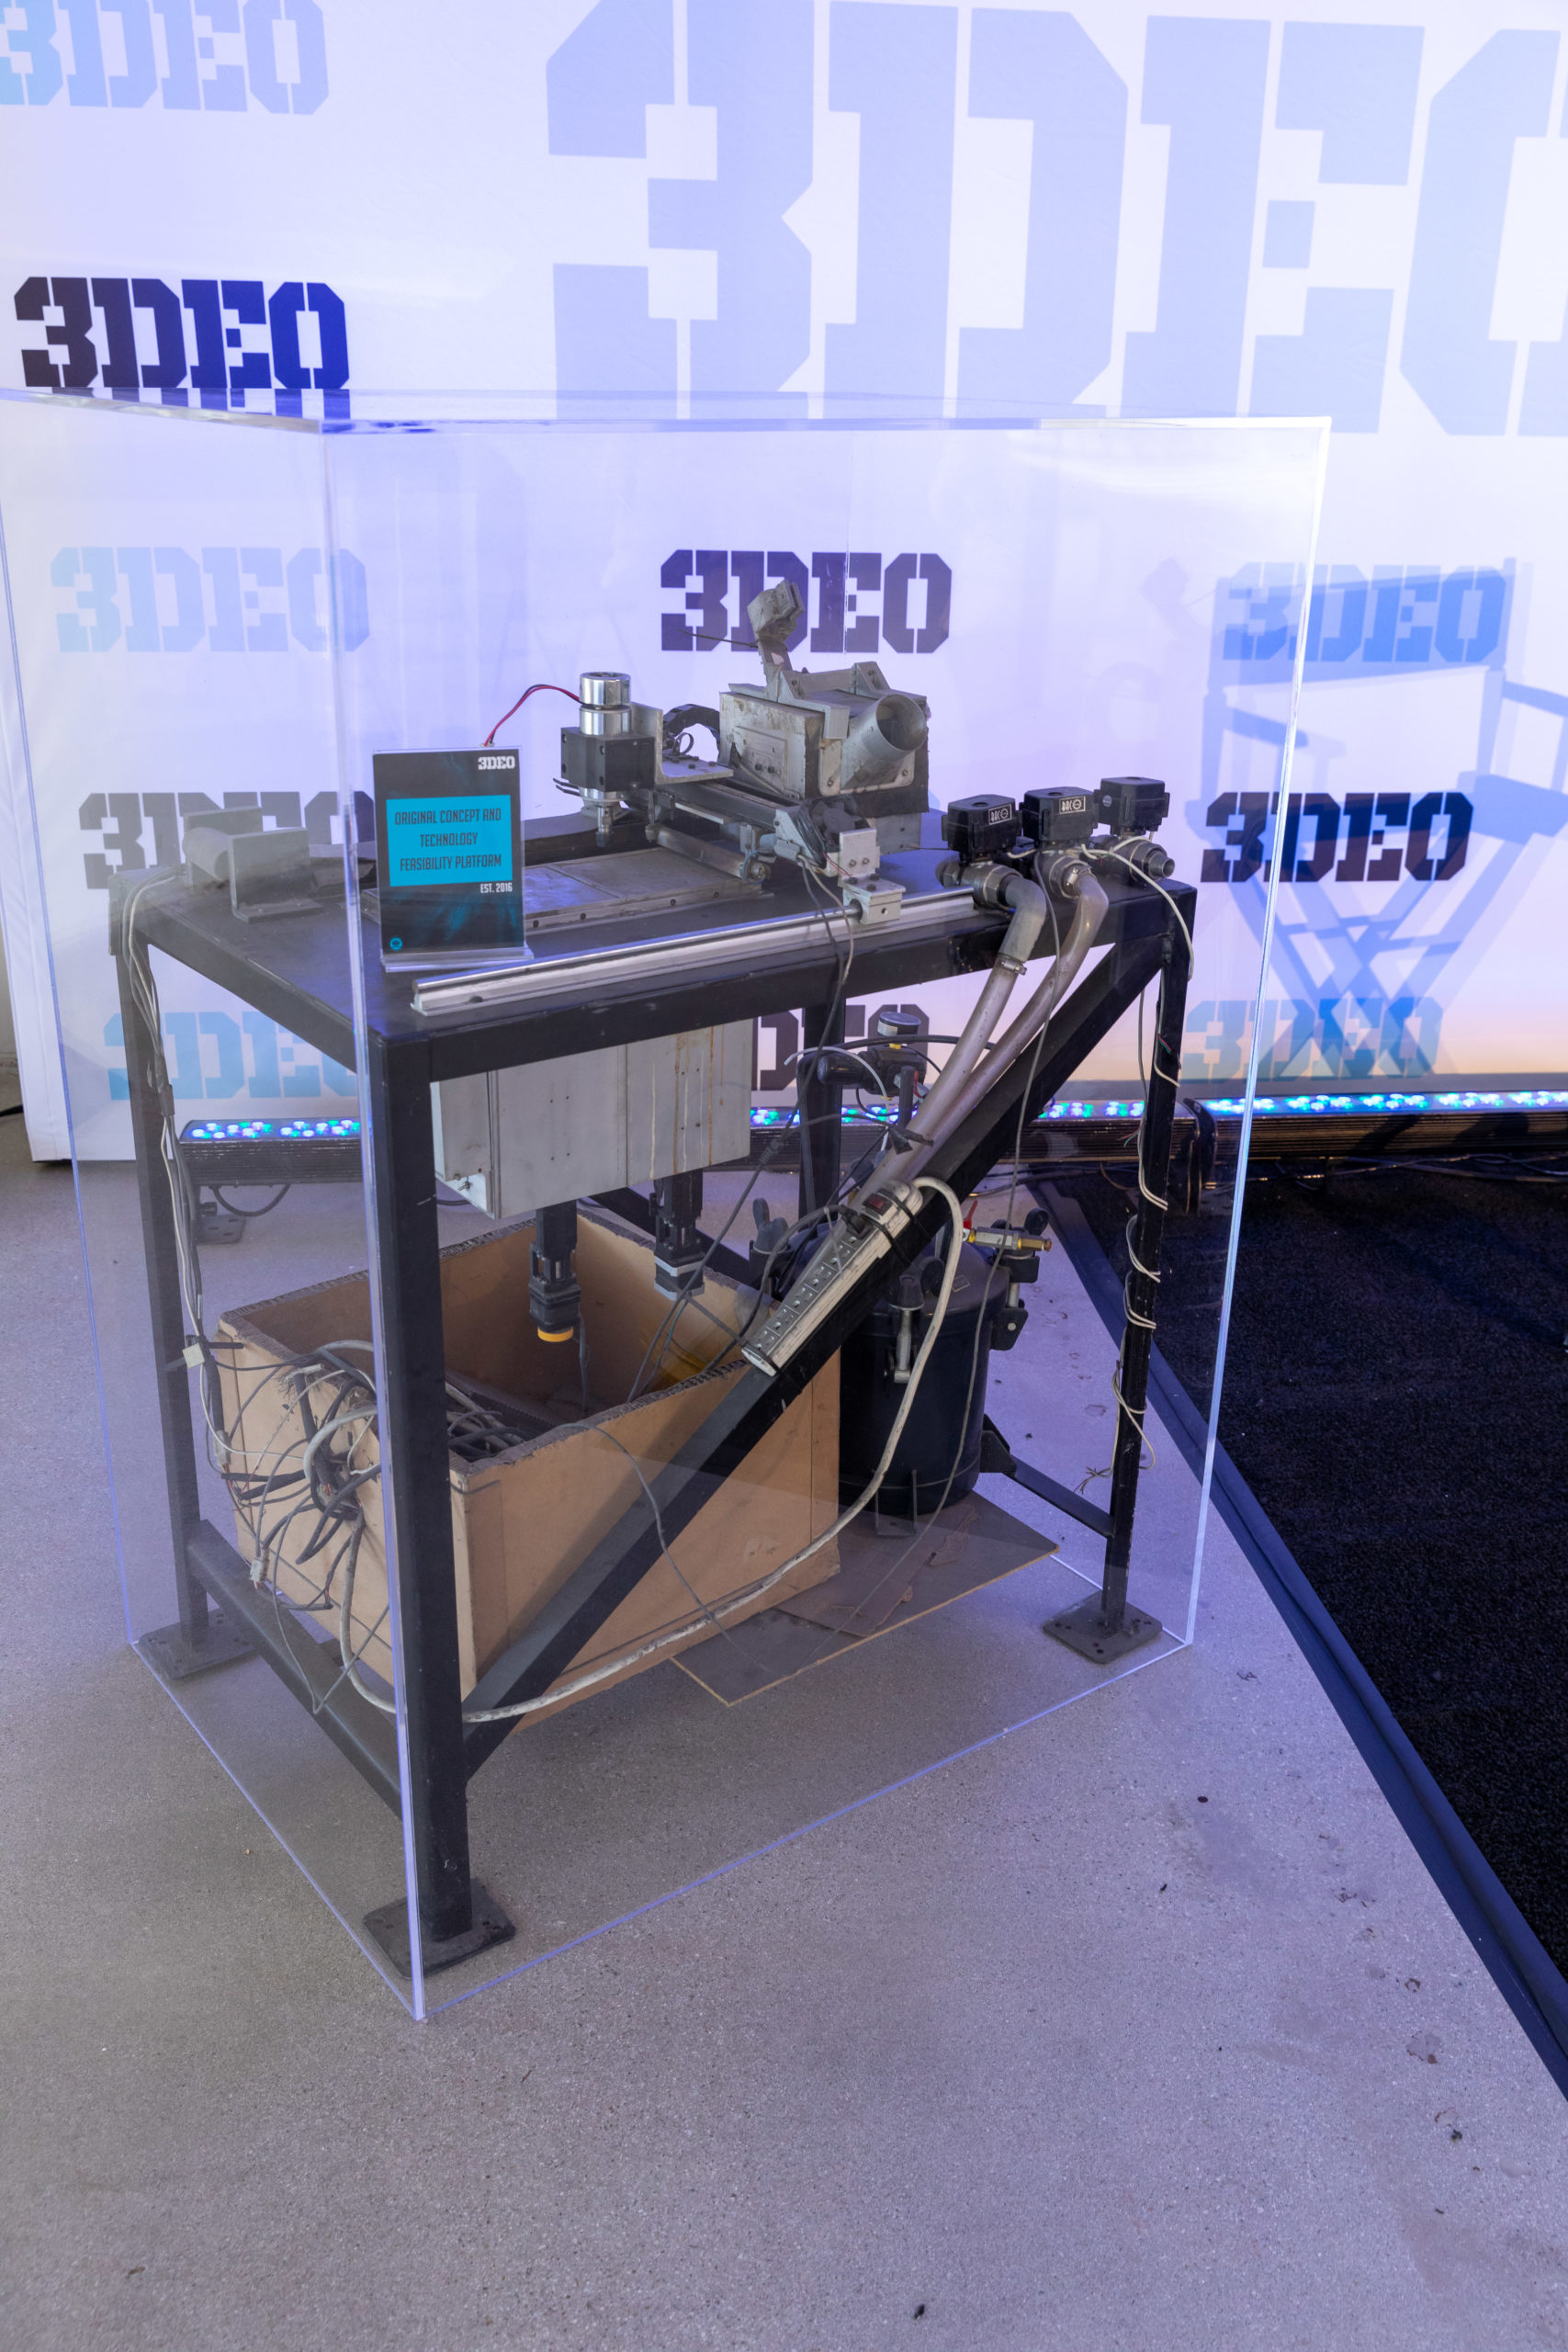 Industrial equipment on display with visible wiring and pipes inside a glass case at a technology expo, with repetitive "3deo" branding in the background.